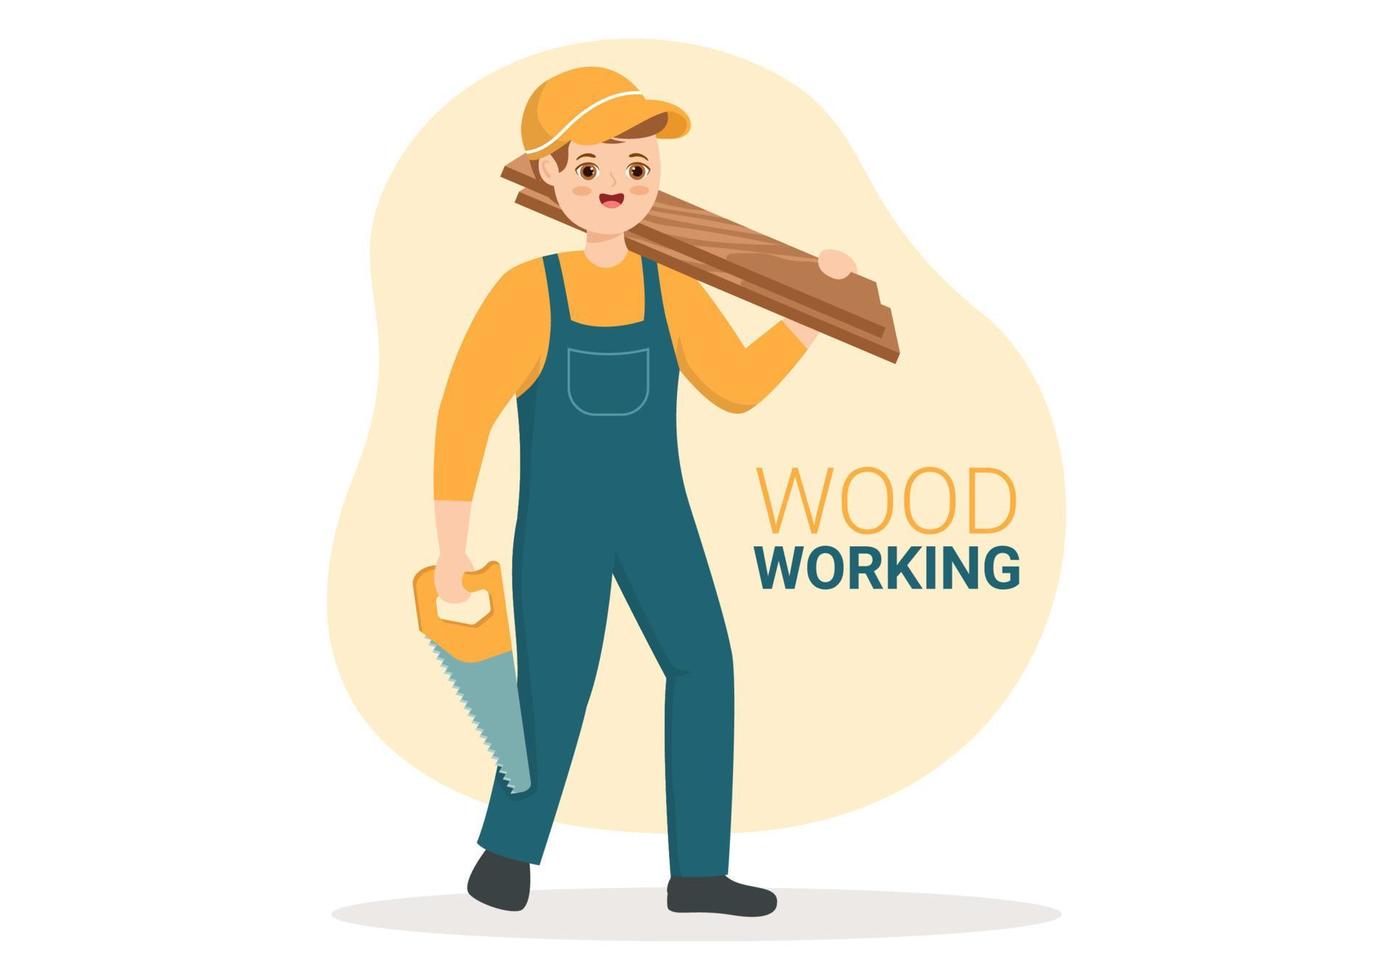 Woodworking with Wood Cutting by Modern Craftsman and Worker using Tools Set in Flat Cartoon Hand Drawn Template Illustration vector